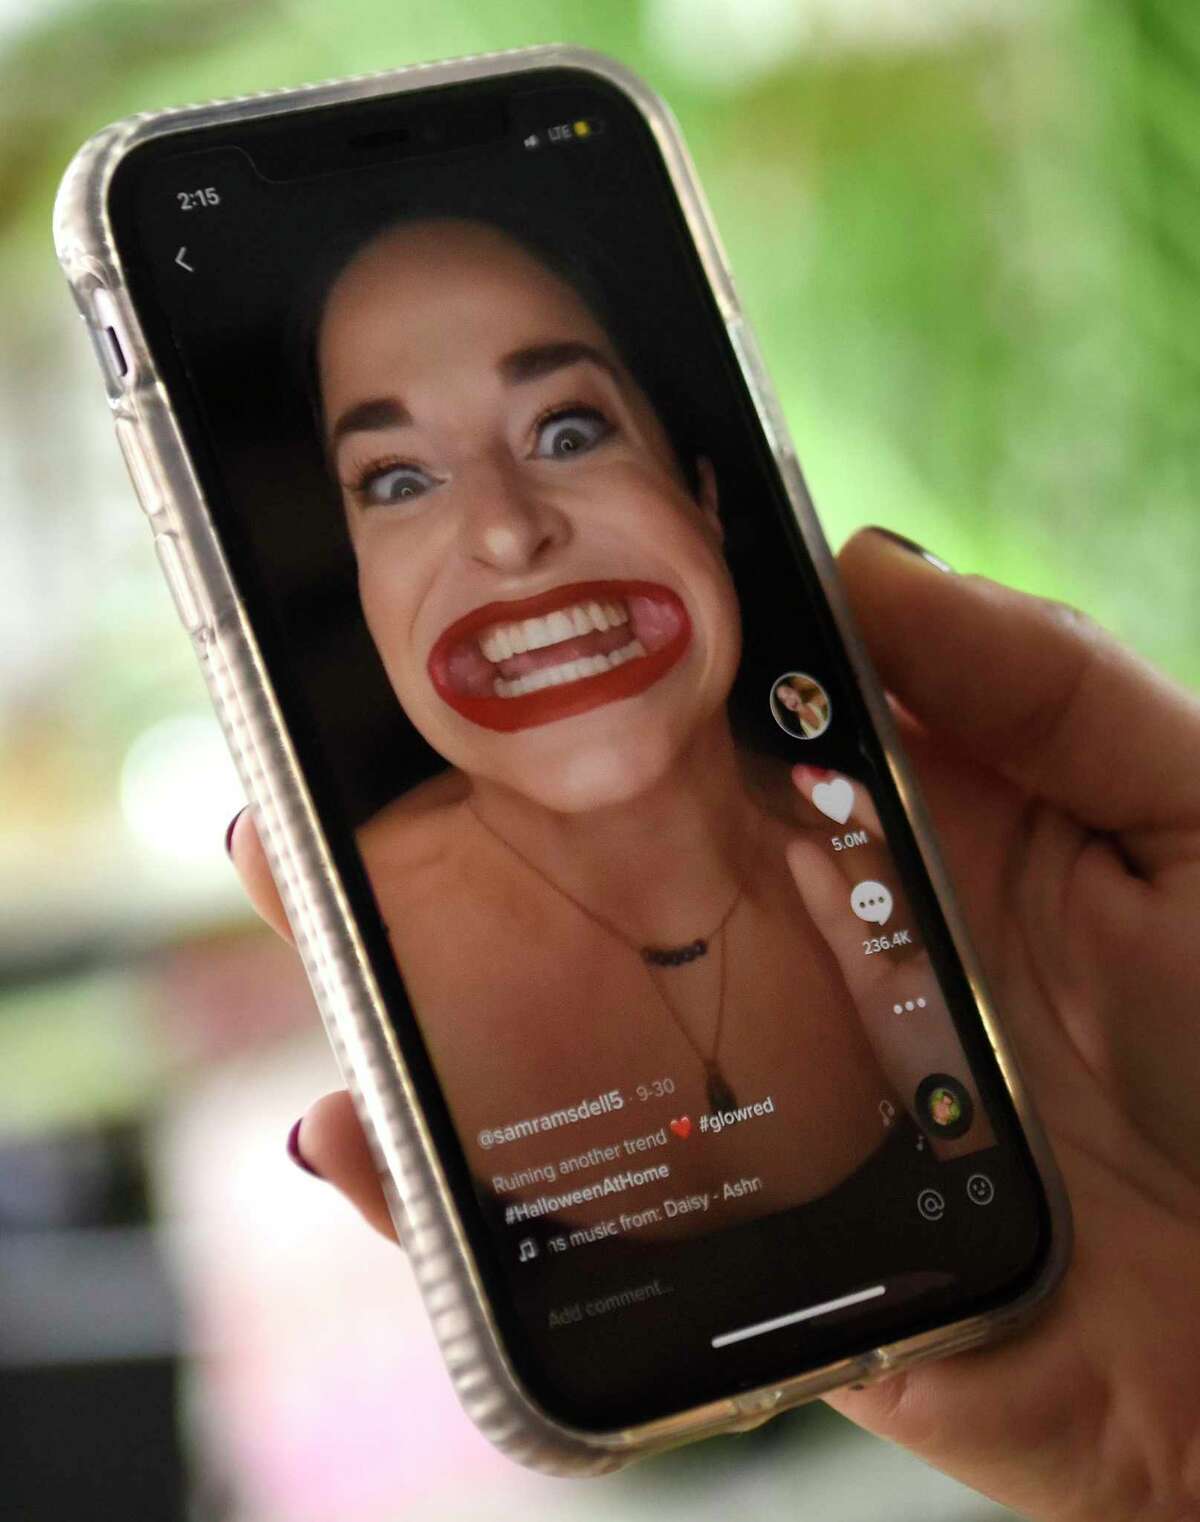 TikTok star Samantha Ramsdell plays her most viewed TikTok video on her phone at her home in Stamford, Conn. Tuesday, Oct. 27, 2020.